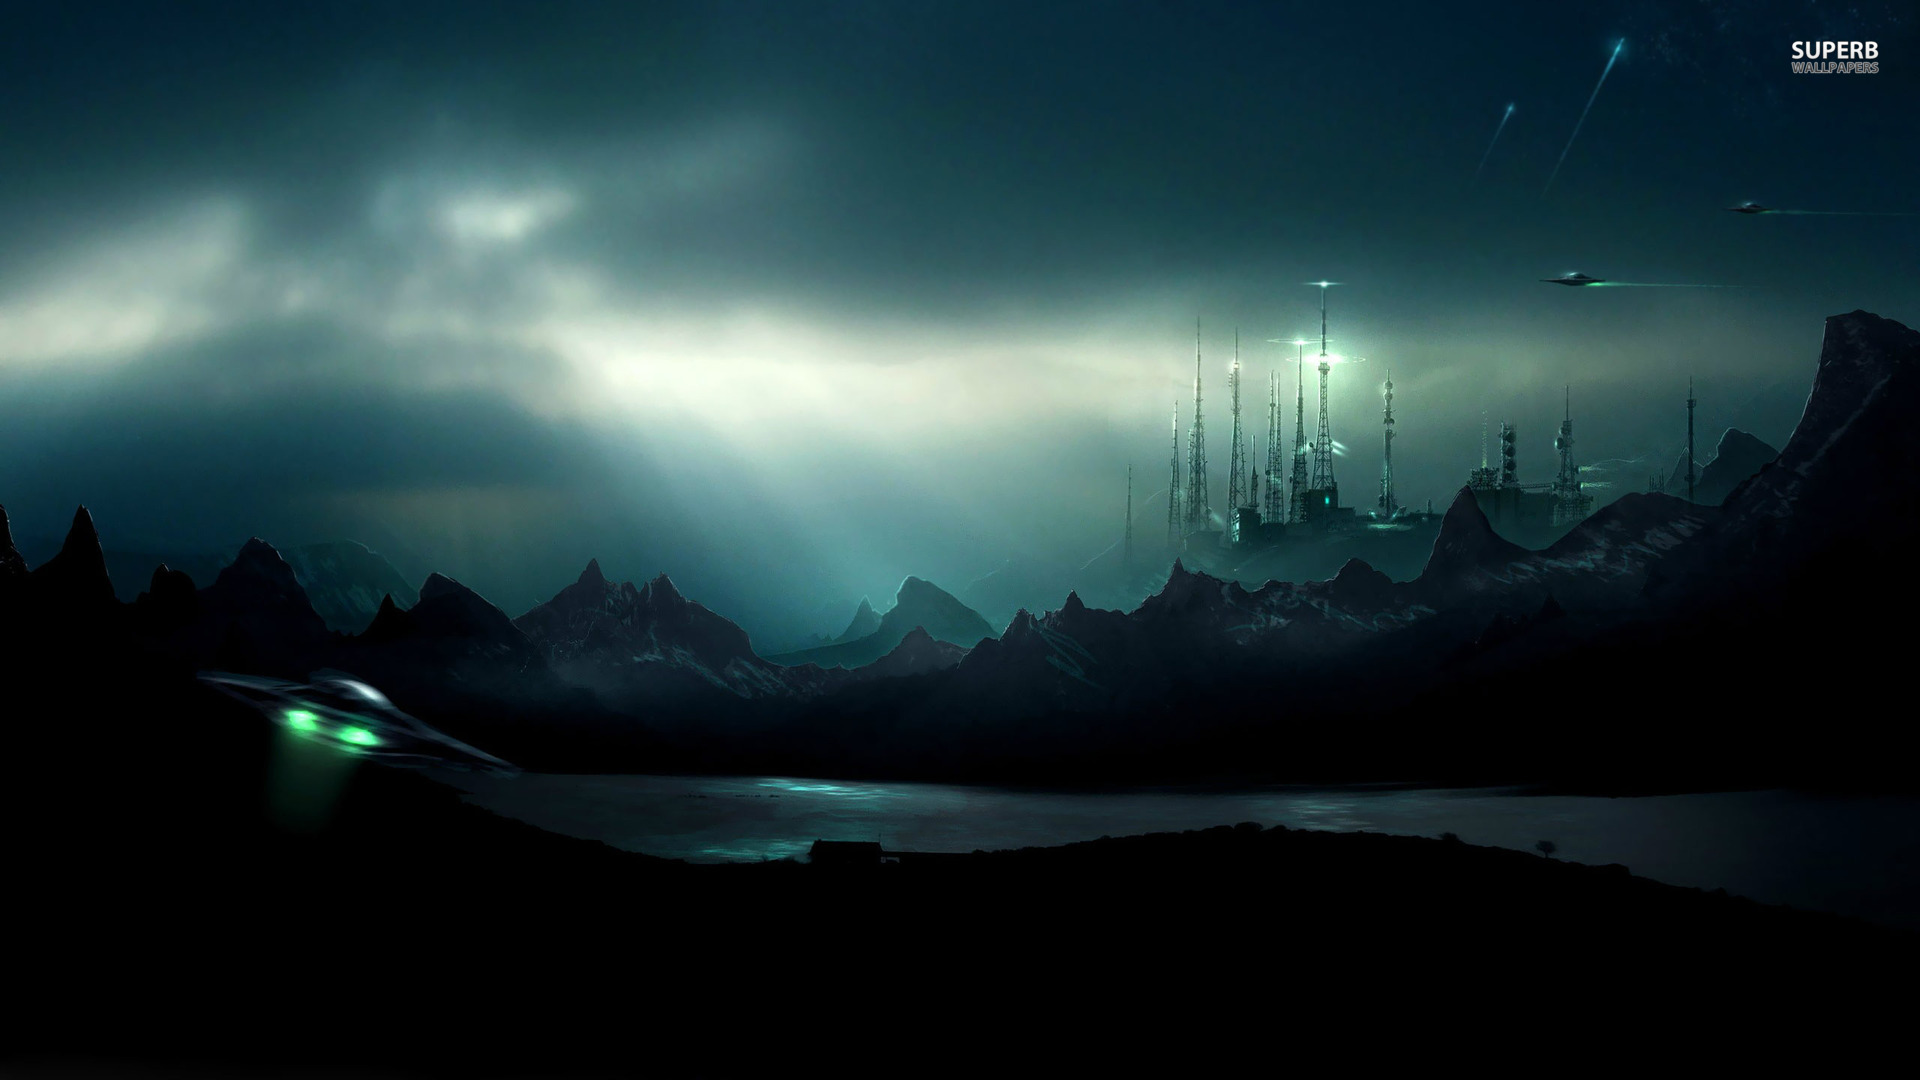 aliens attacking the city wallpaperwide hd wallpaper site